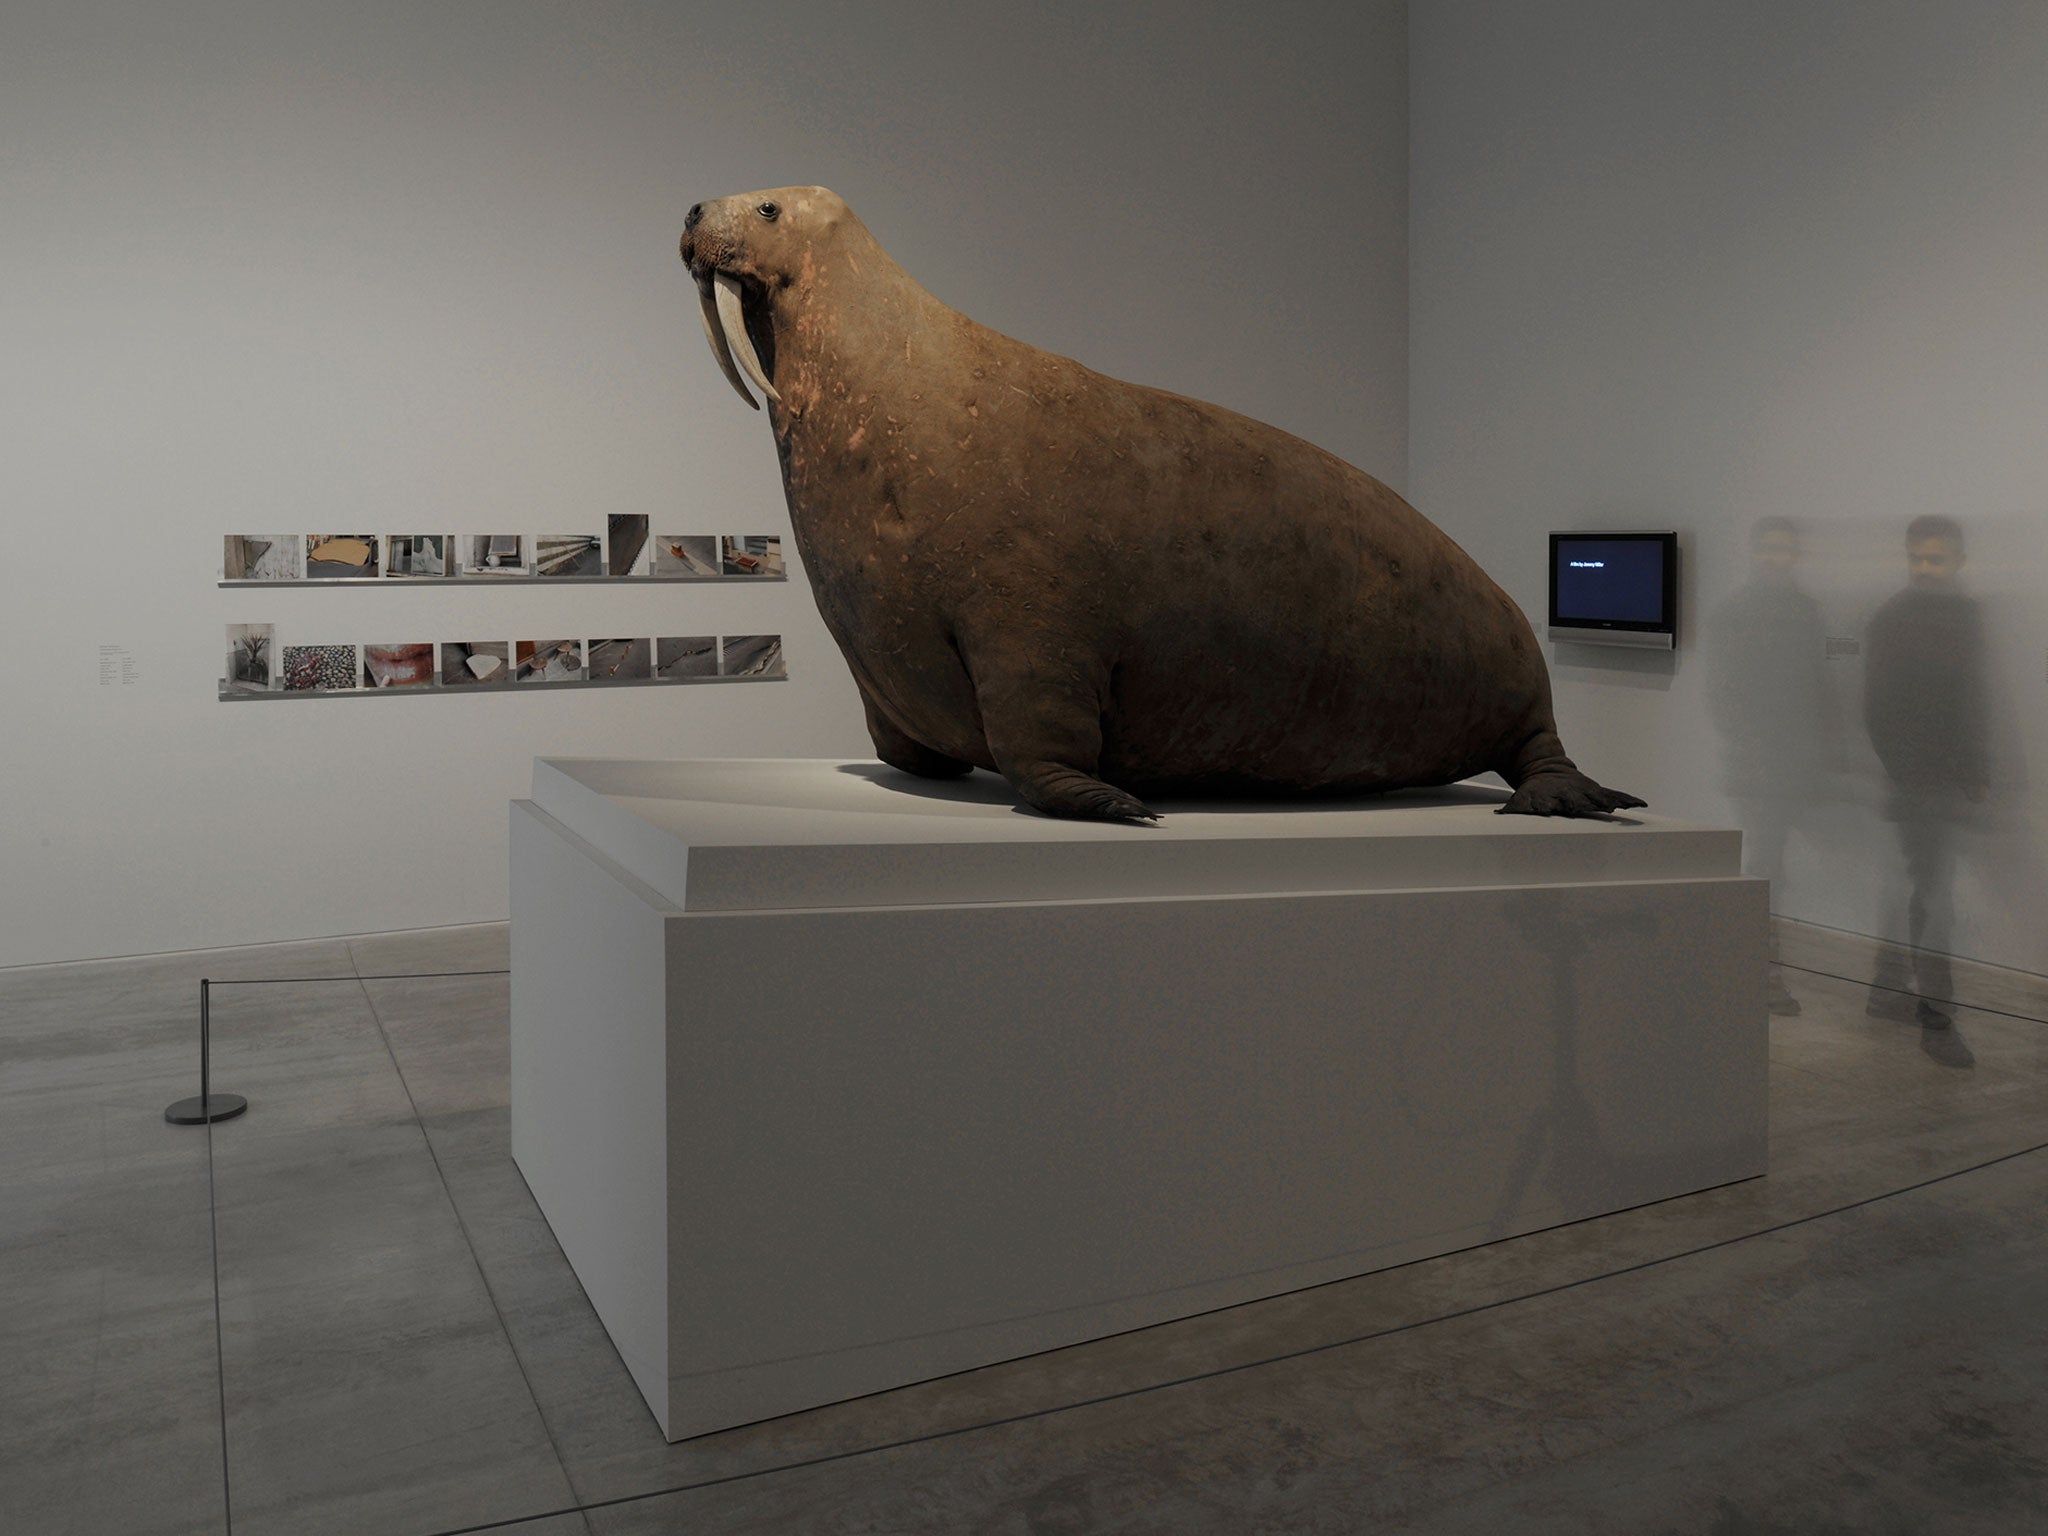 Objects such as the odd stuffed walrus, above, play off the others’ oddness